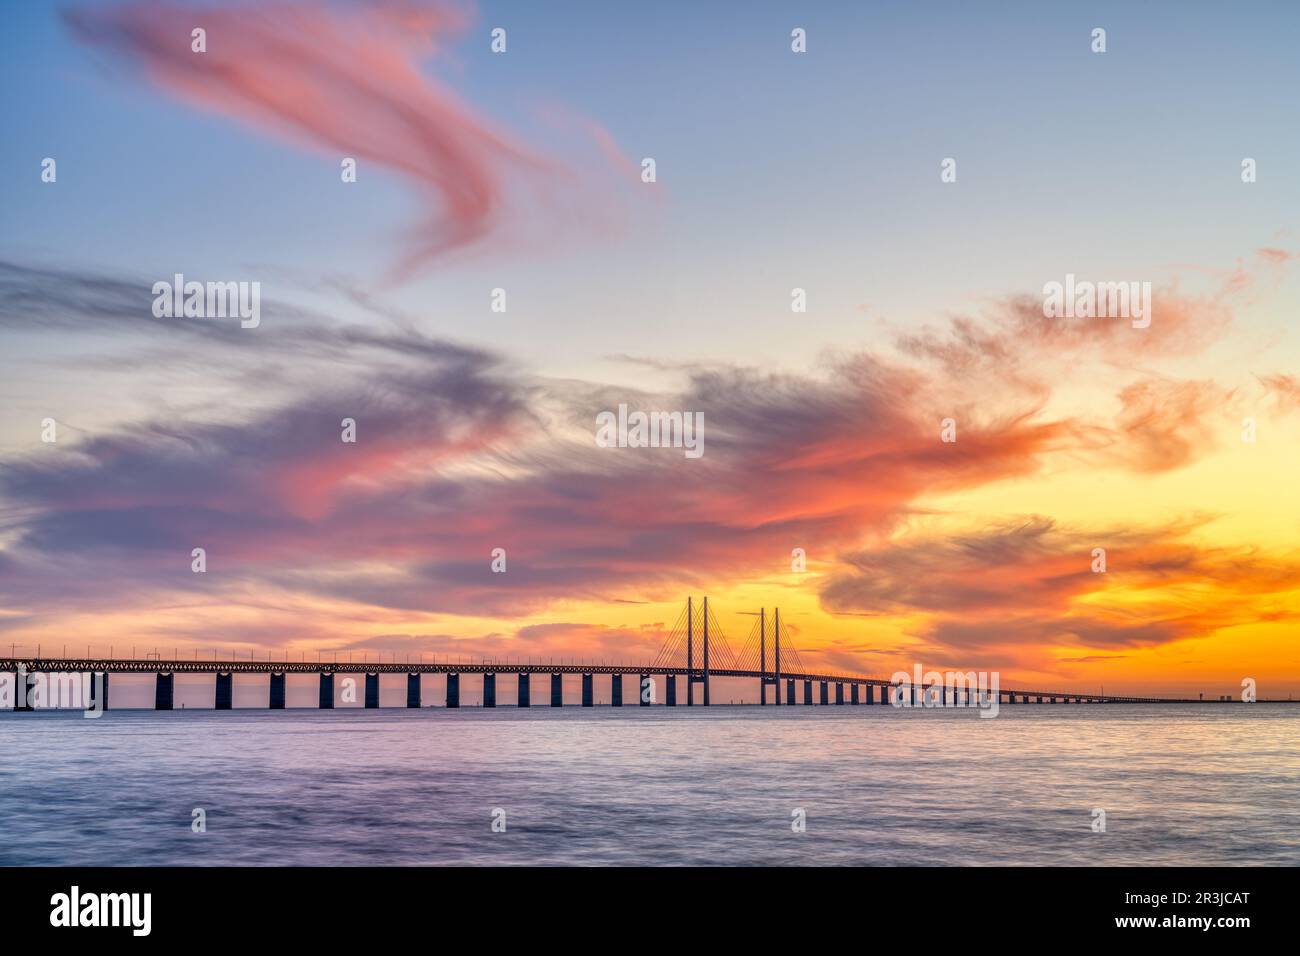 The famous Oresund bridge between Denmark and Sweden after a spectacular sunset Stock Photo